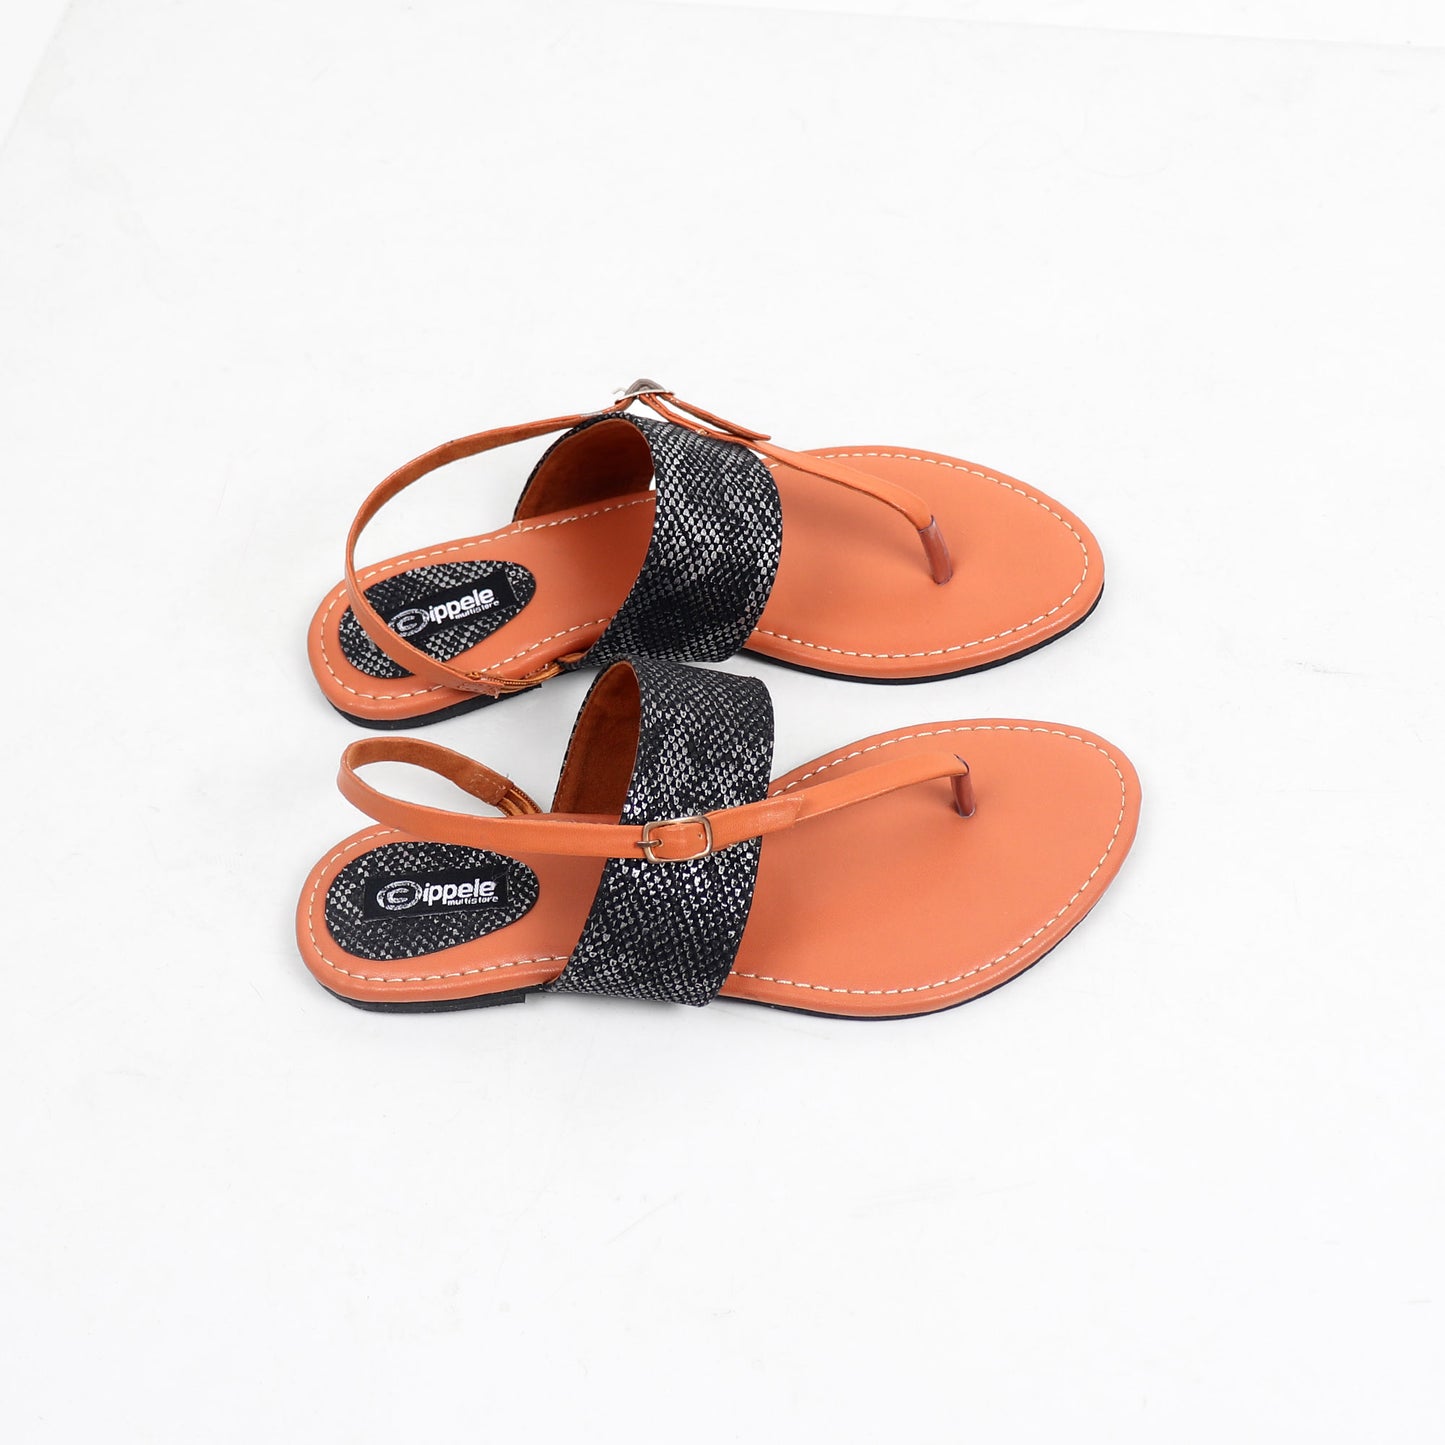 Foot Wear,Something Fashionable Sandals With Black Upper - Cippele Multi Store